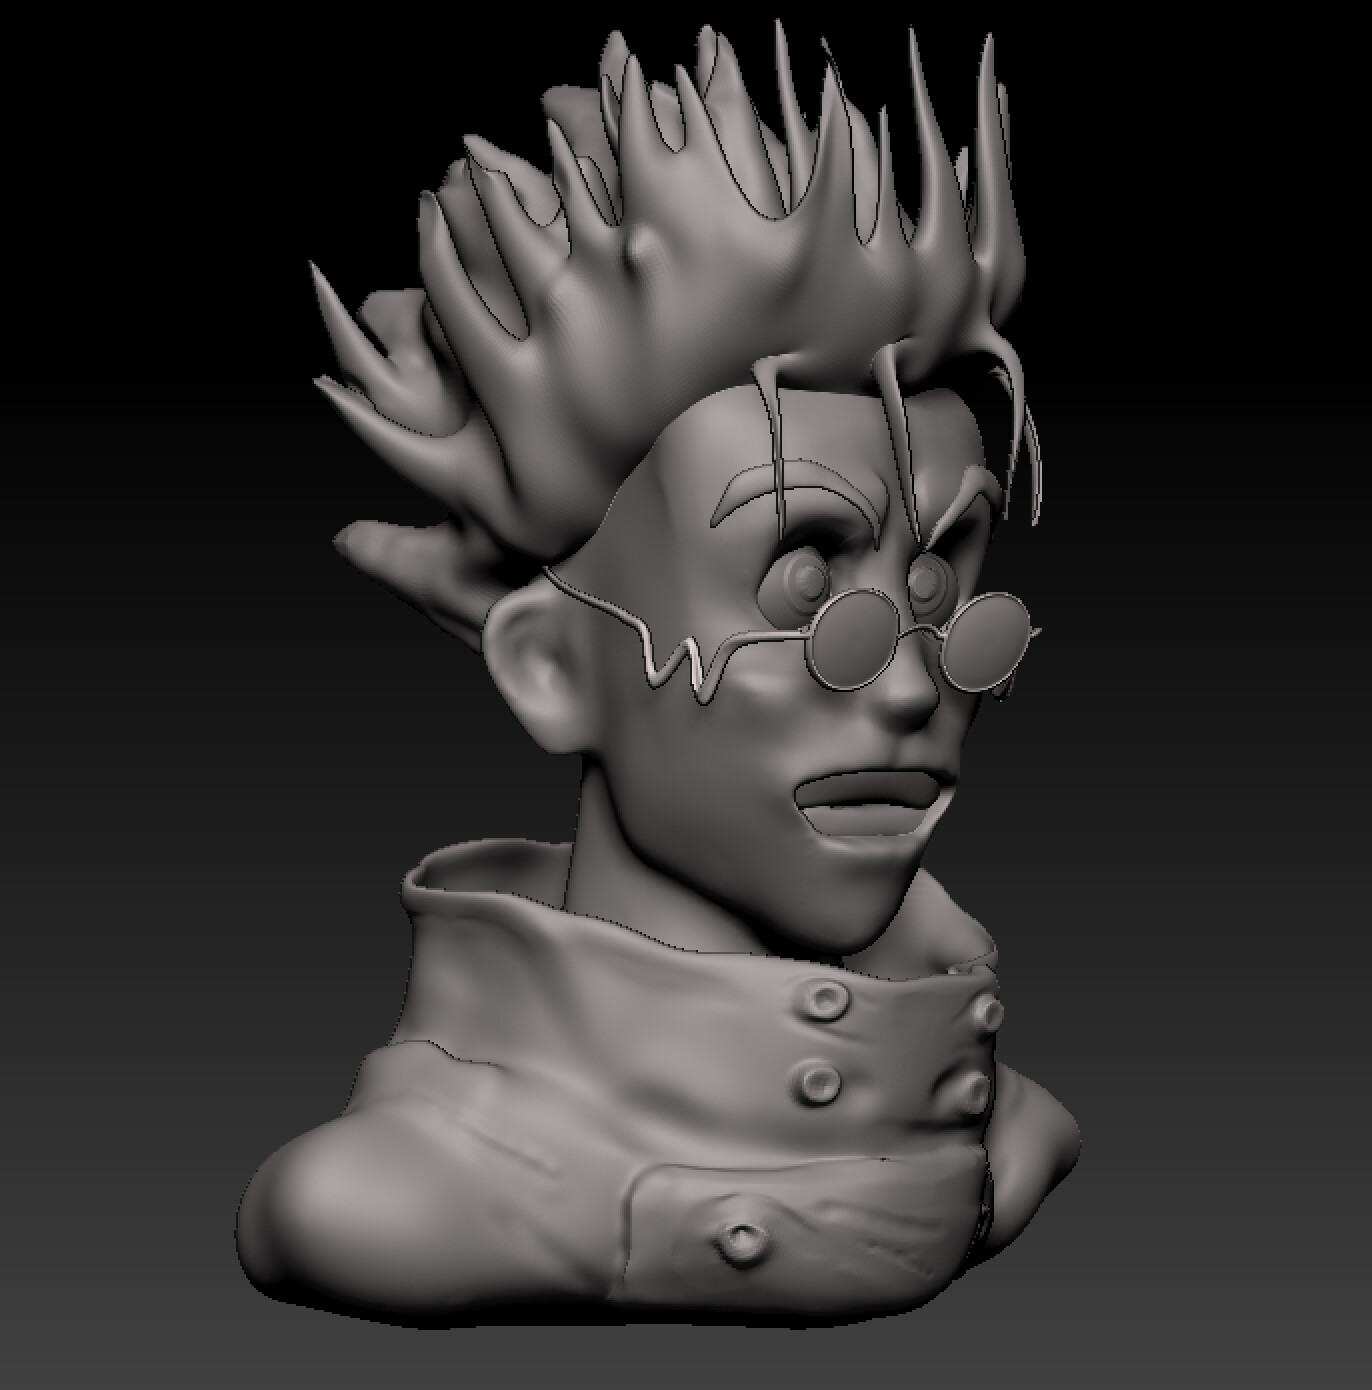 Ryan Wofford - Anime character bust design